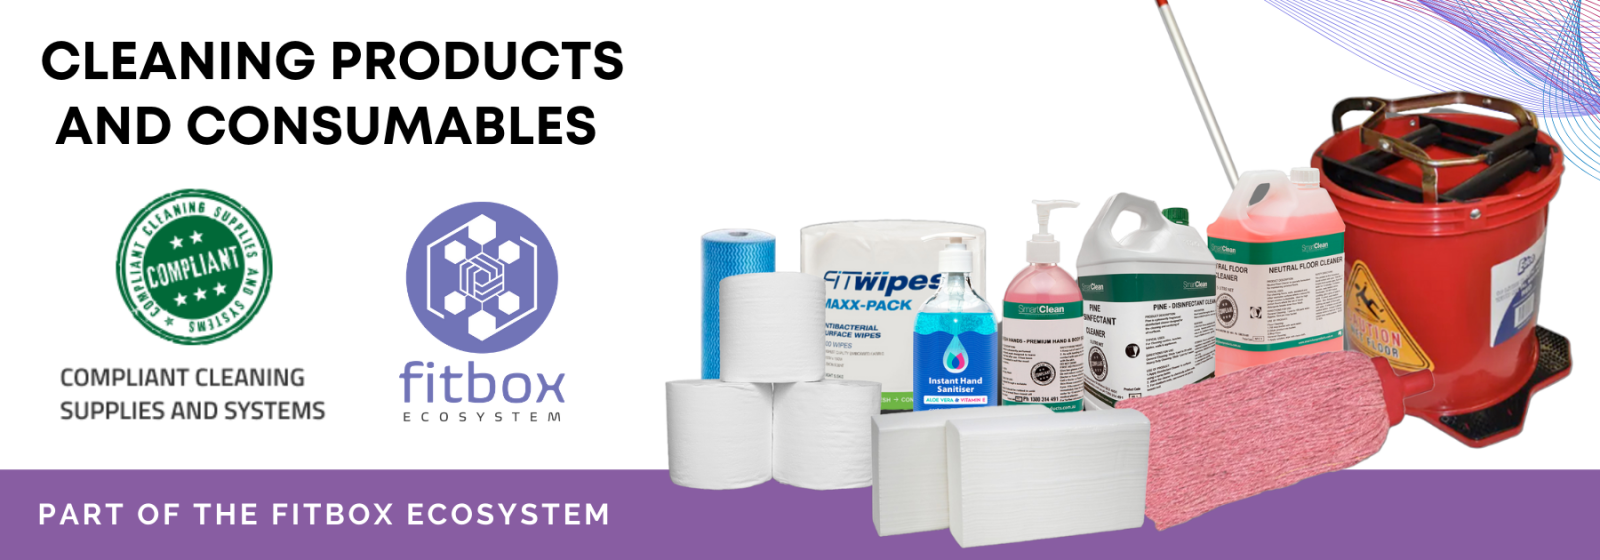 Compliant Cleaning Products and Consumables. Part of FitBox Ecosystem